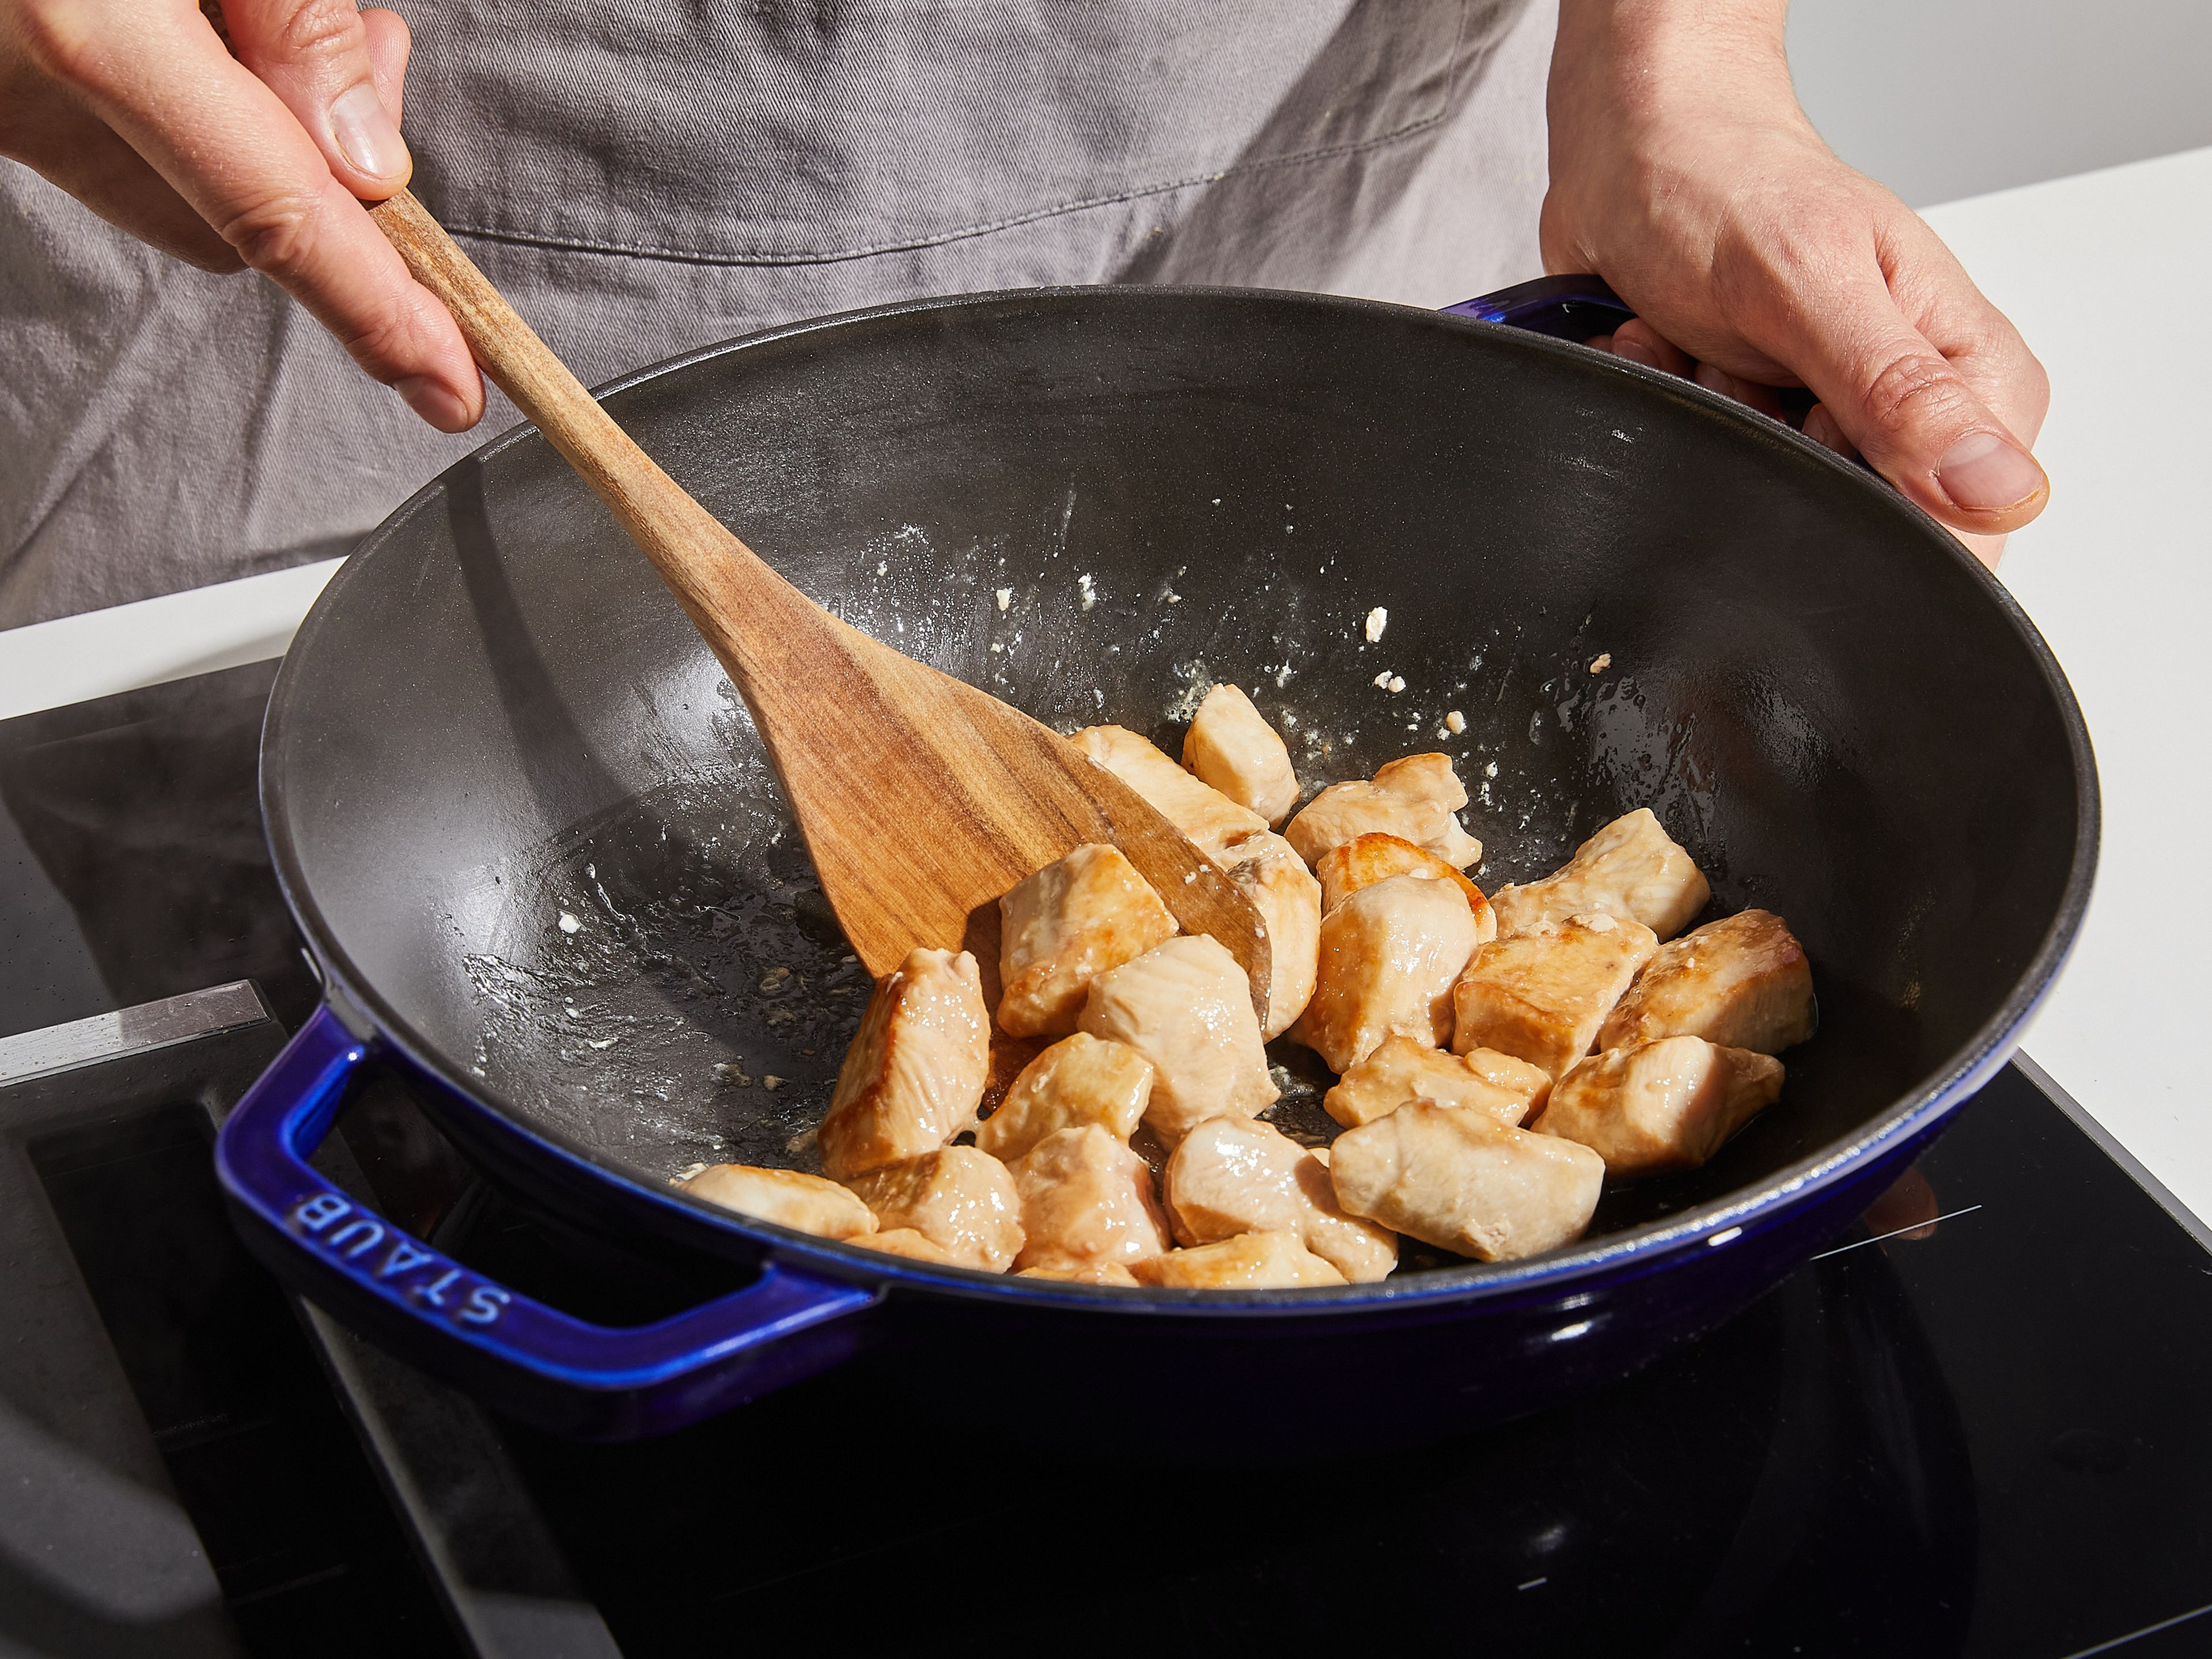 In a large frying pan, toast pine nuts over medium heat until light brown. Remove and set aside. Add vegetable oil to the pan and heat over medium heat. Add chicken fillet pieces and sear over medium-high heat for approx. 3–4 min. on all sides, then remove from pan and set aside.